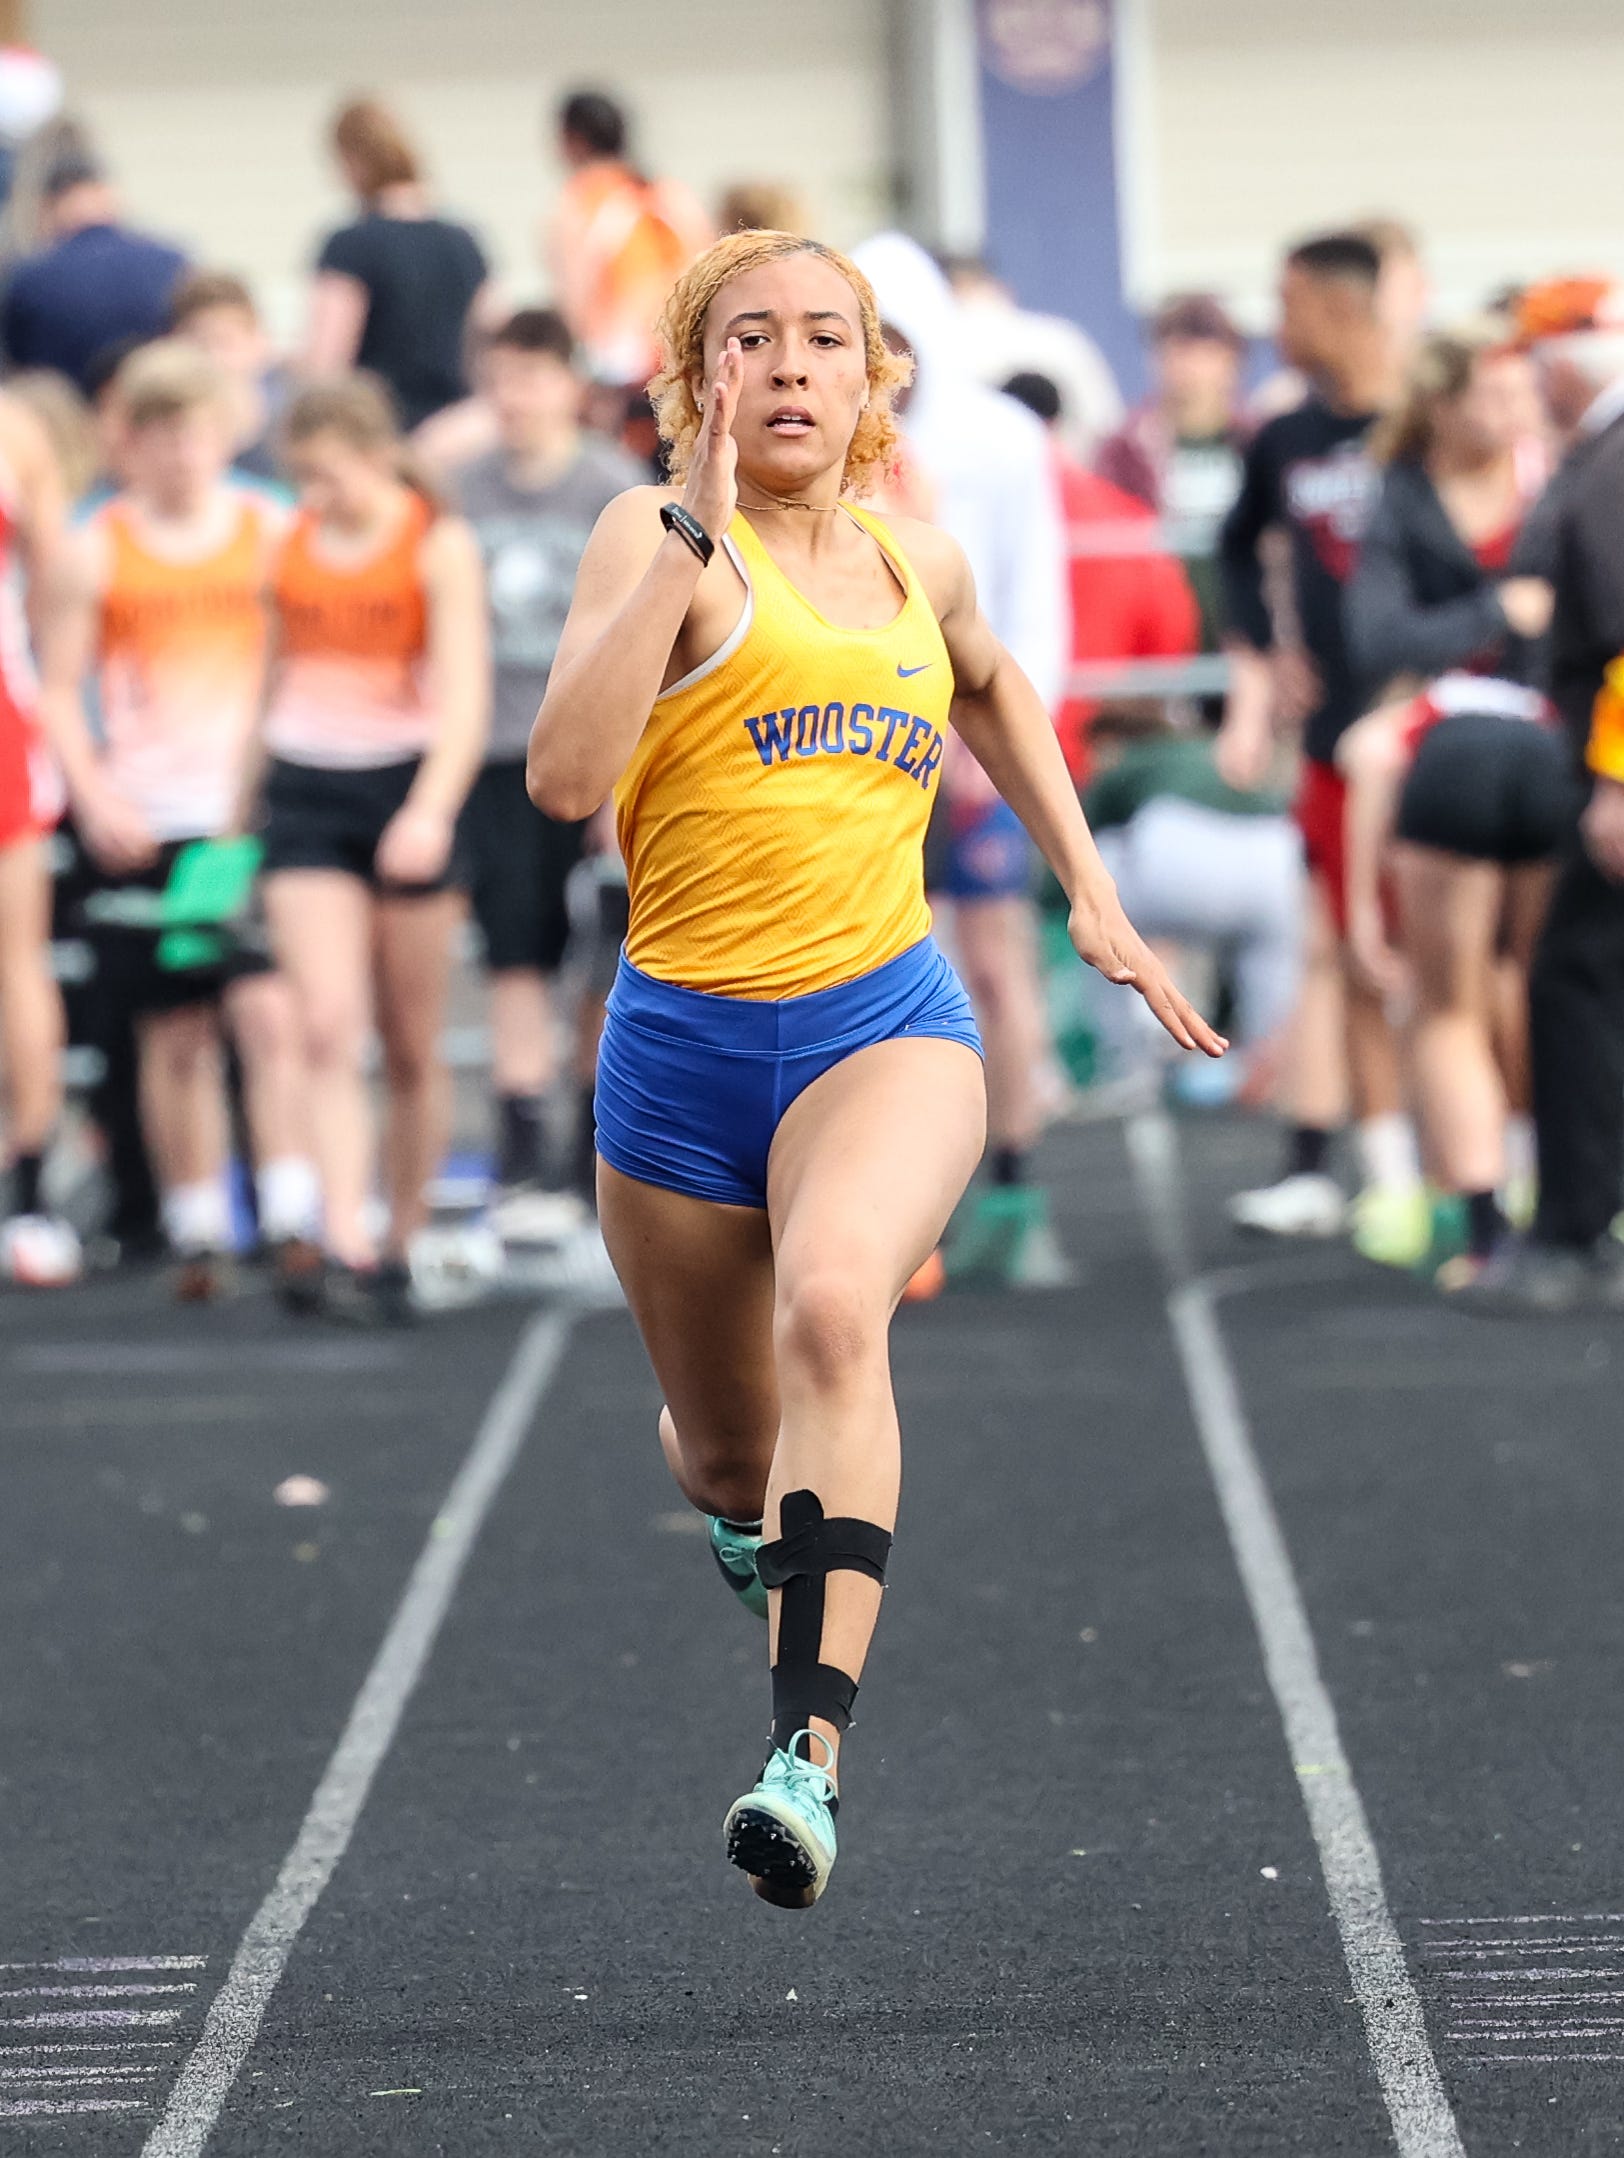 Prep Roundup: Wooster sweeps Ashland in track & field matchup